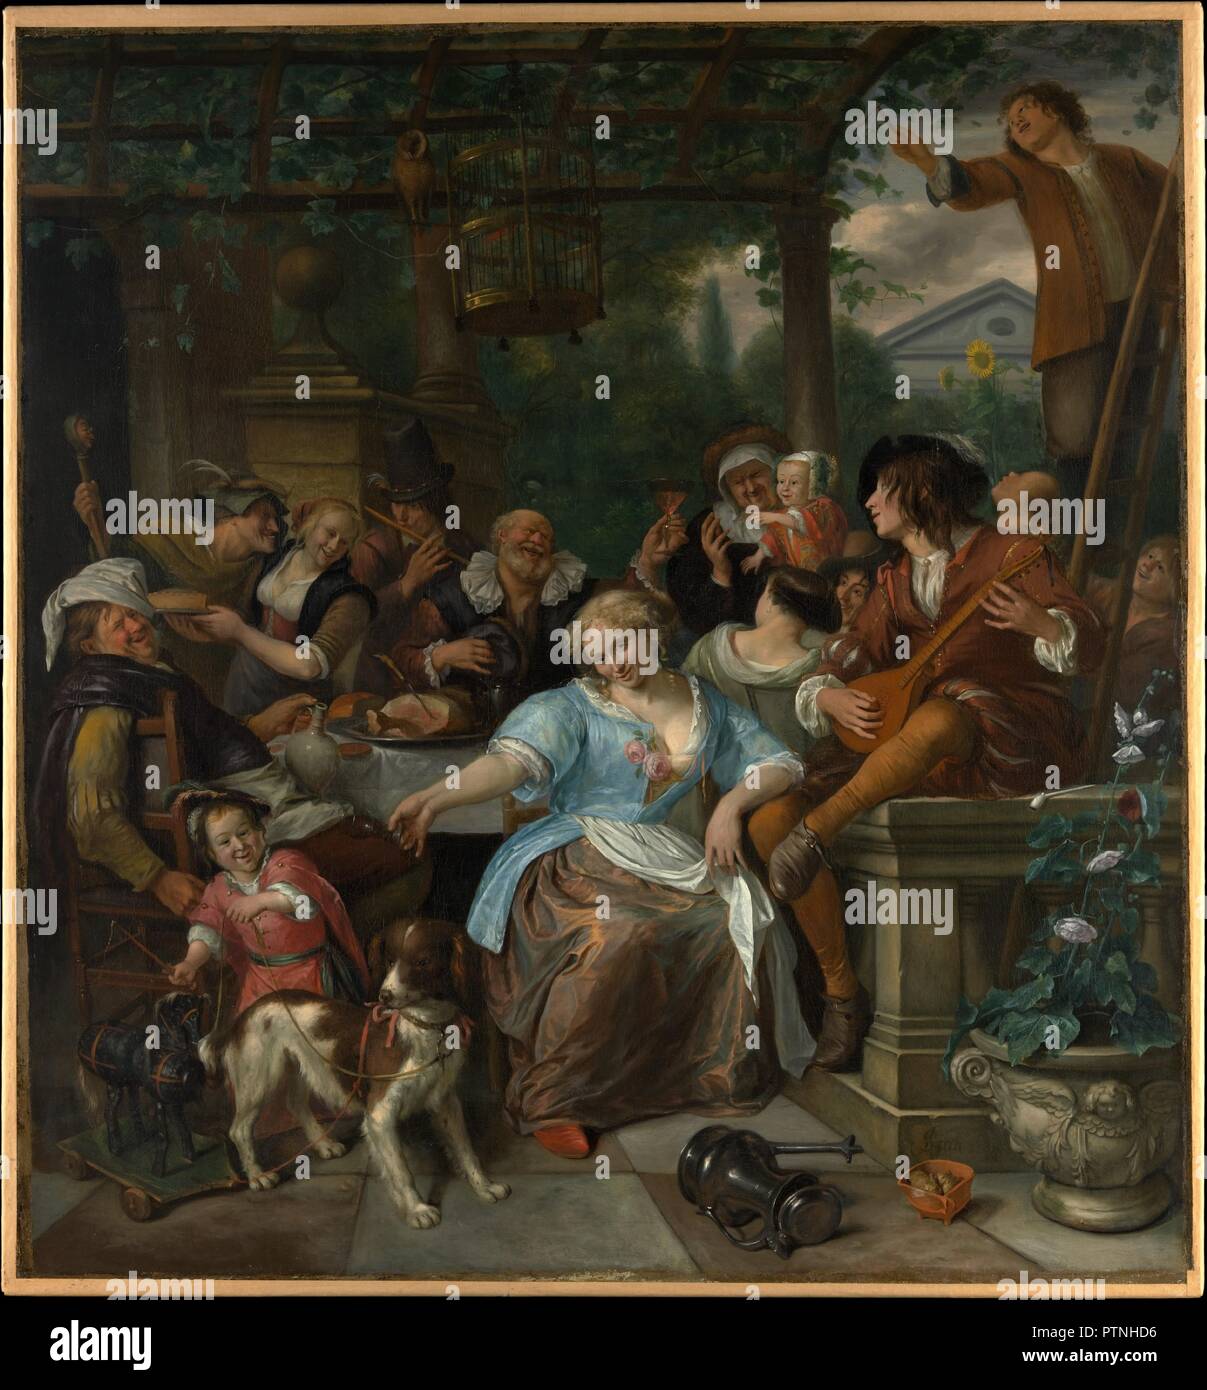 Merry Company on a Terrace. Artist: Jan Steen (Dutch, Leiden 1626-1679  Leiden). Dimensions: 55 1/2 x 51 3/4 in. (141 x 131.4 cm). Date: ca. 1670.  In this late painting of about